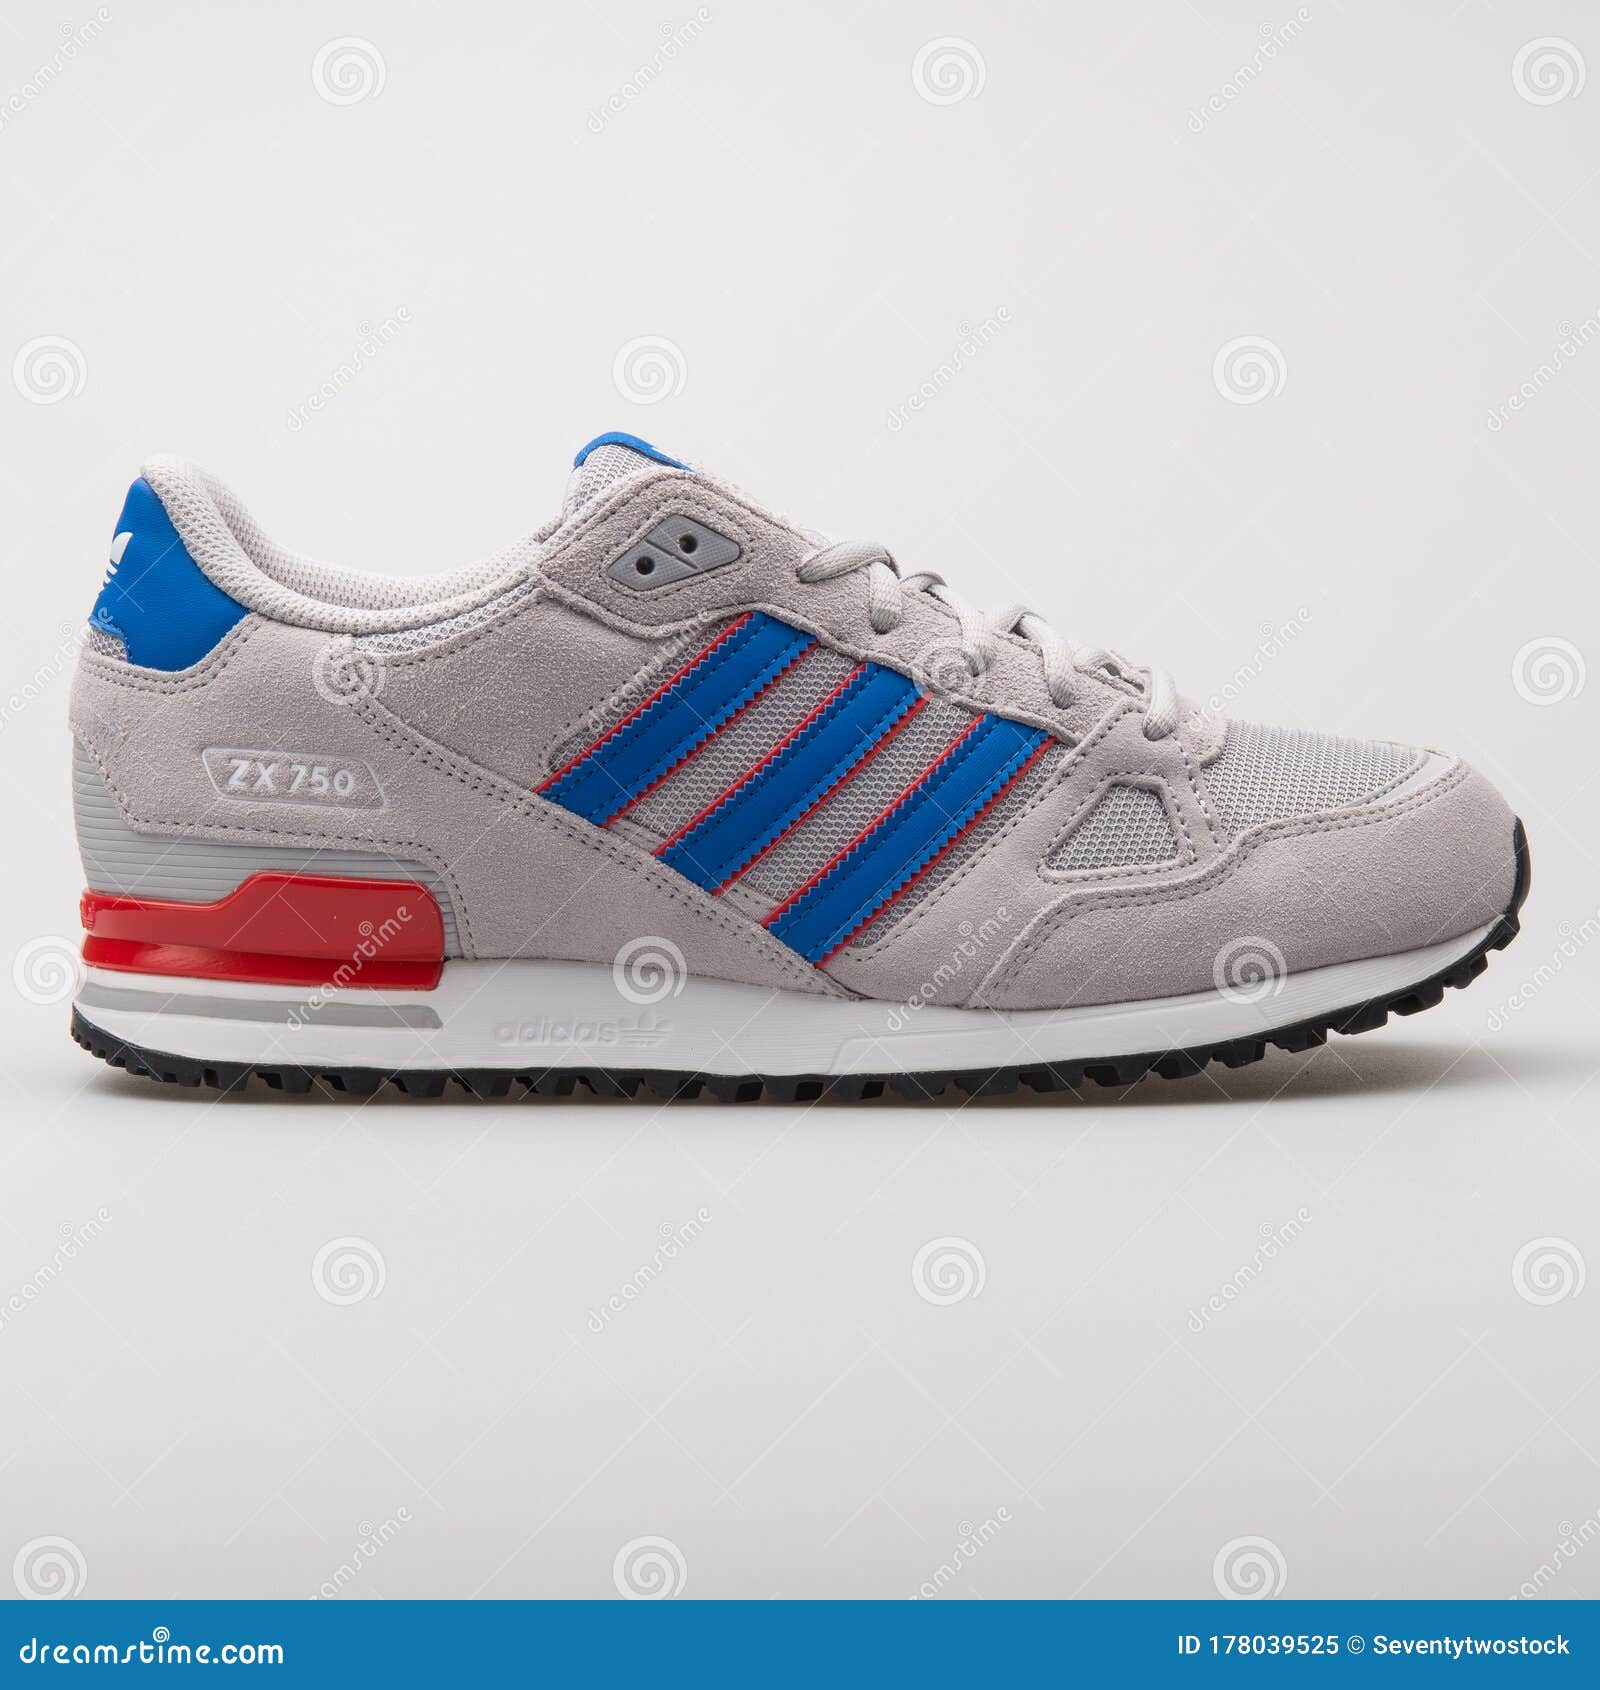 Adidas ZX 750 Blue and Red Sneaker Image - Image of laces, activity: